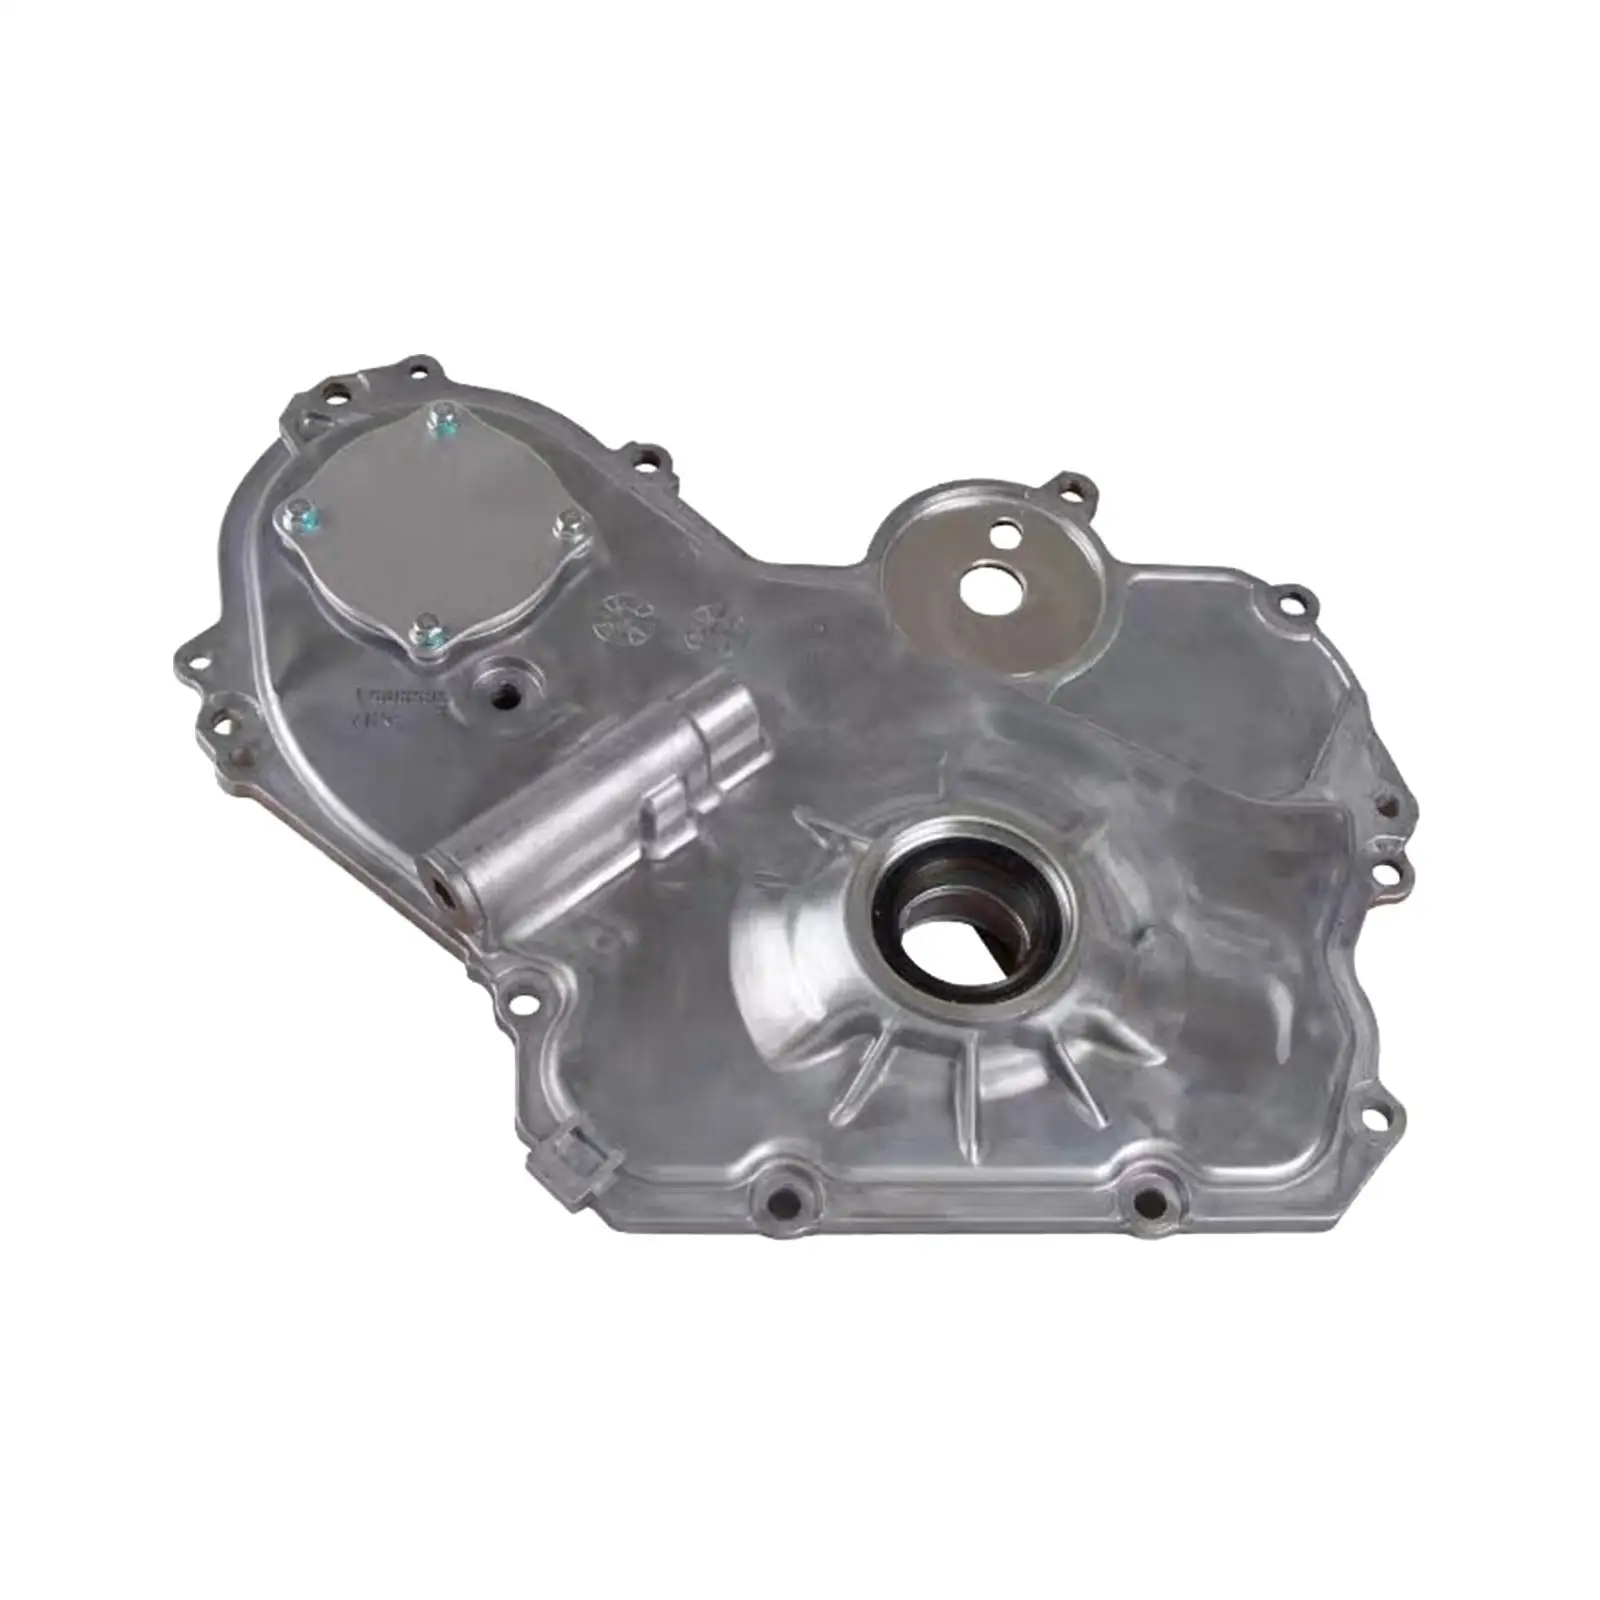 Engine Timing Cover with Oil Pump Repair Parts 12584621 for Buick Lacrosse Regal